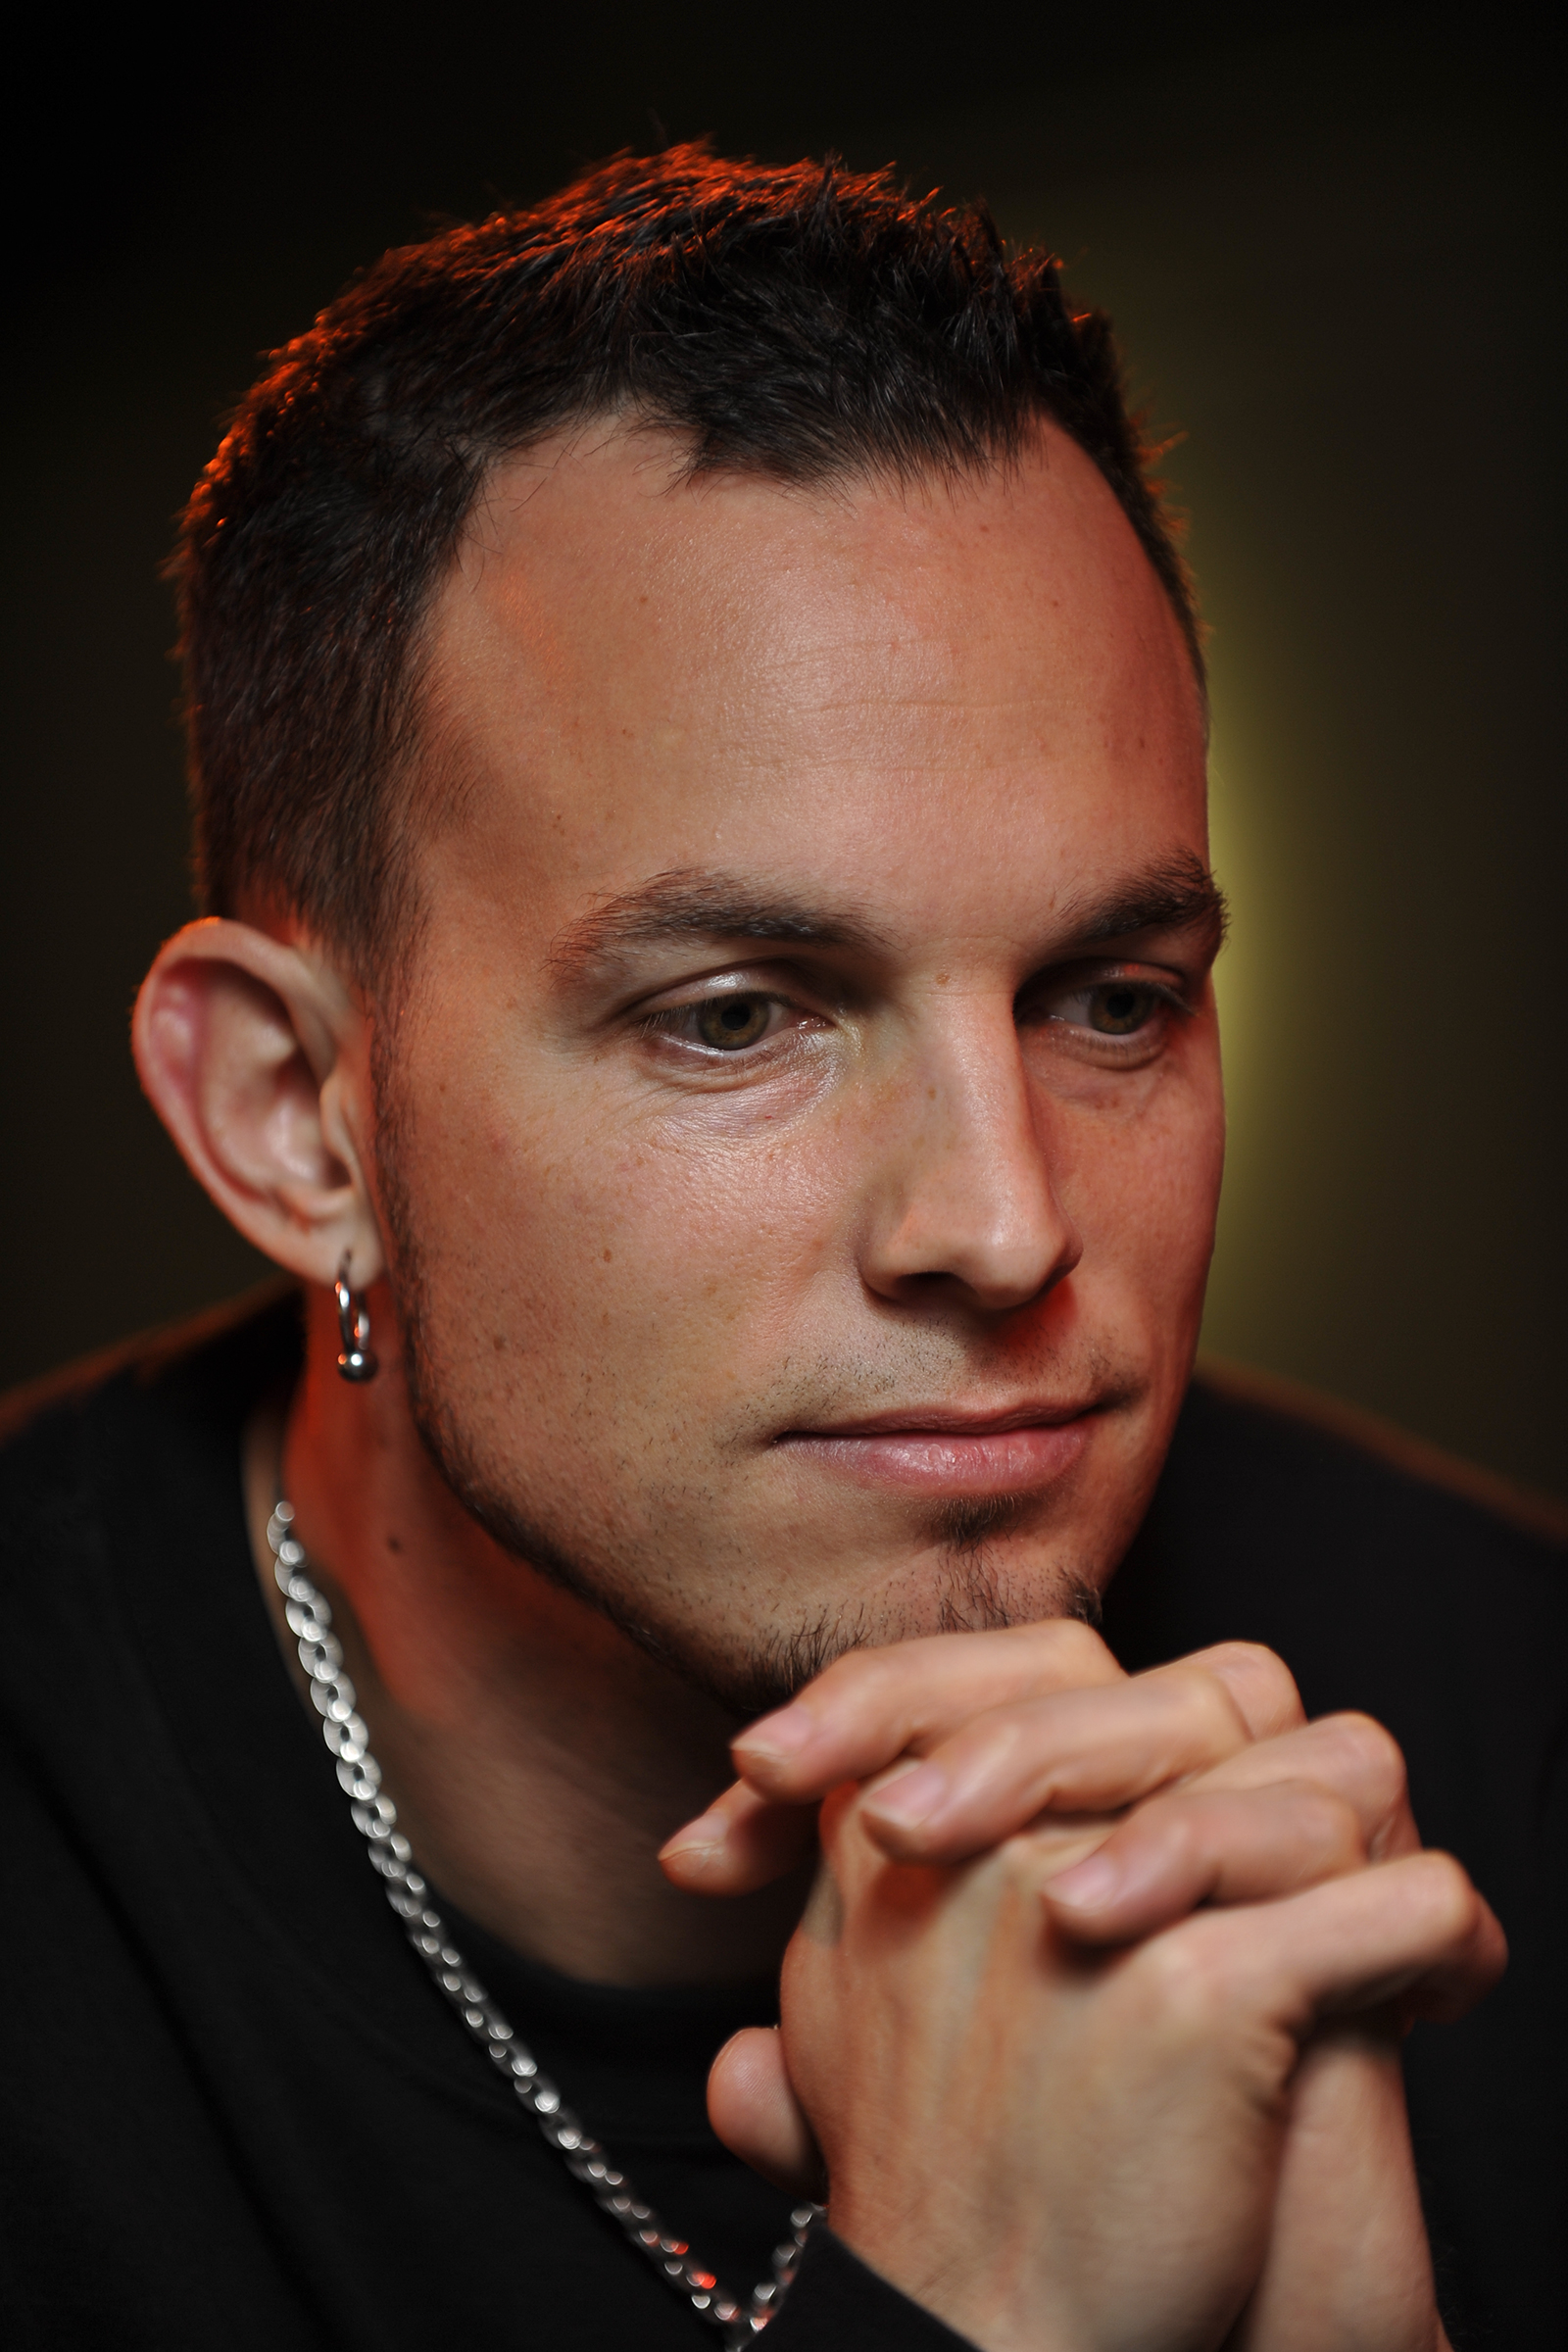 Mark Tremonti, lead guitarist of American rock bands Creed and Alter Bridge. During an interview, Colston Hall. (Photo by Joseph Branston/Guitarist Magazine via Getty Images)